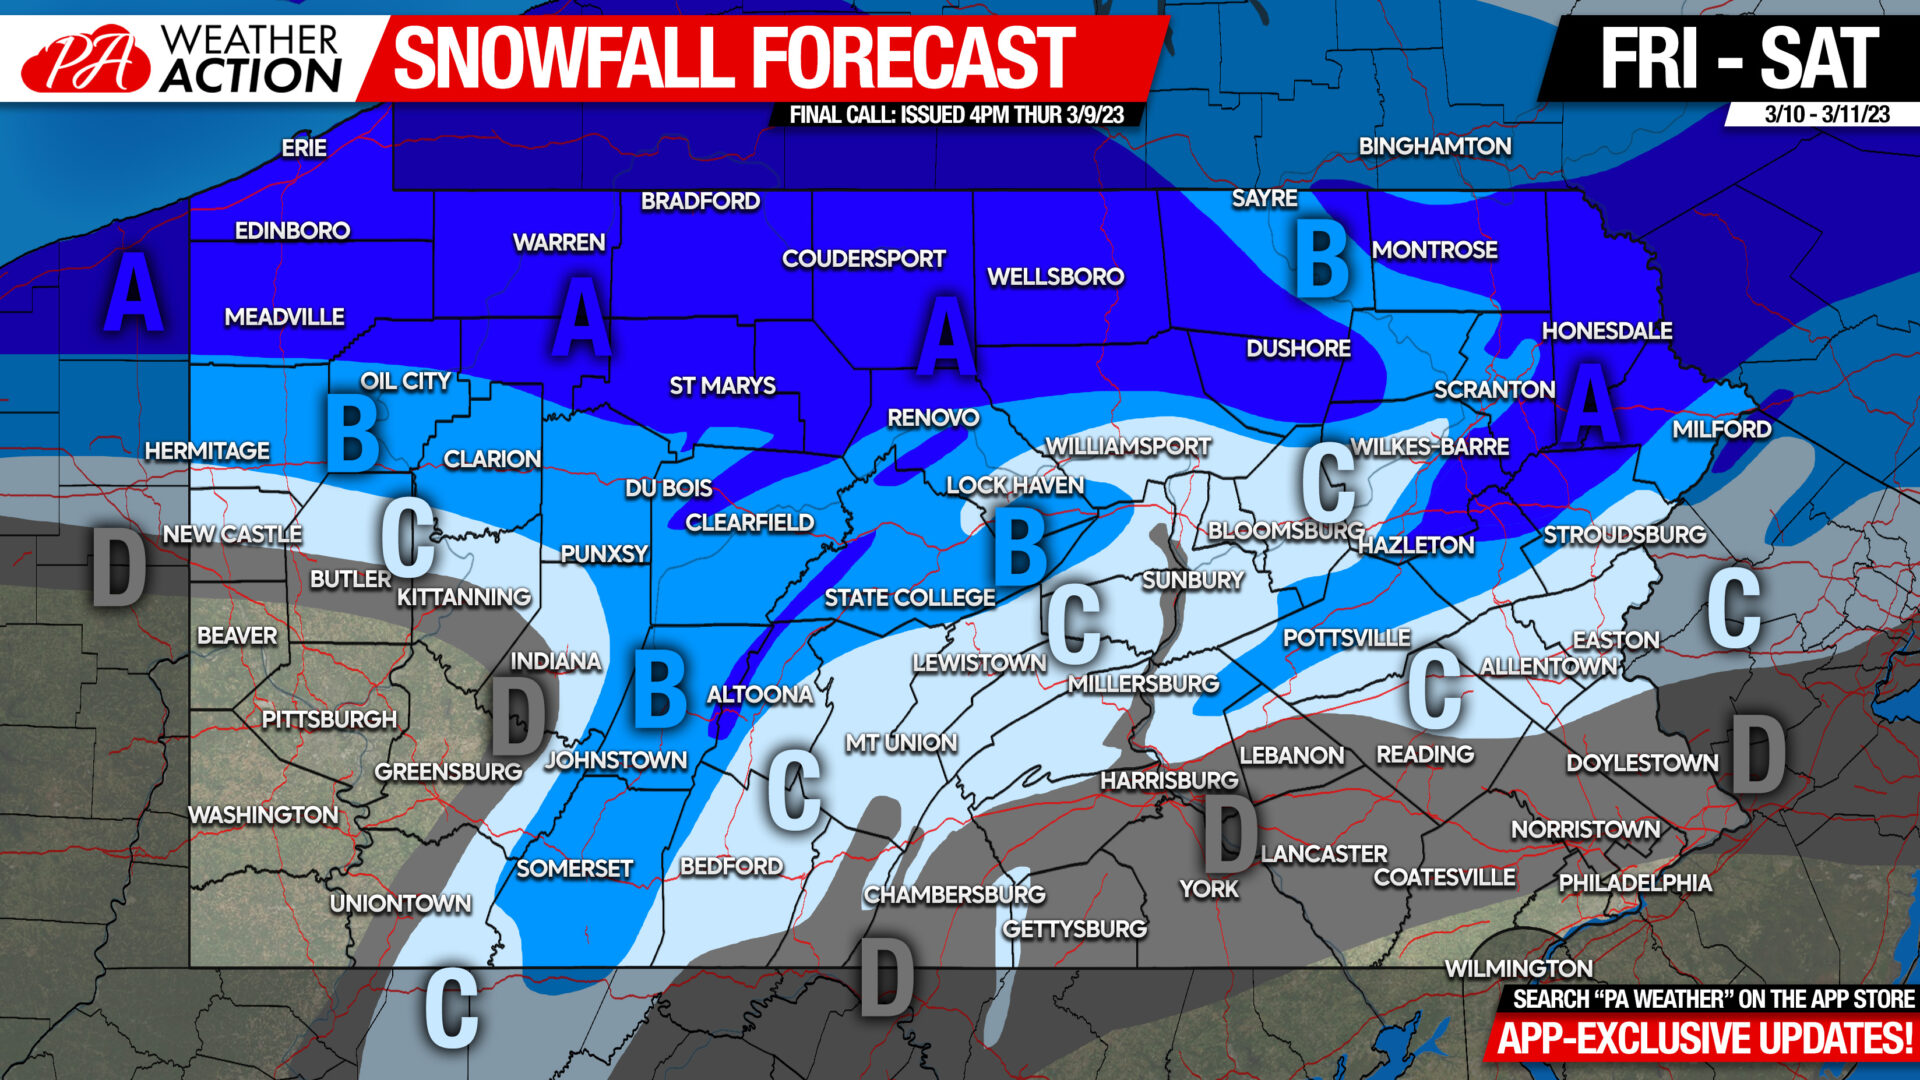 Final Call Snowfall Forecast for Friday – Saturday’s Winter Storm